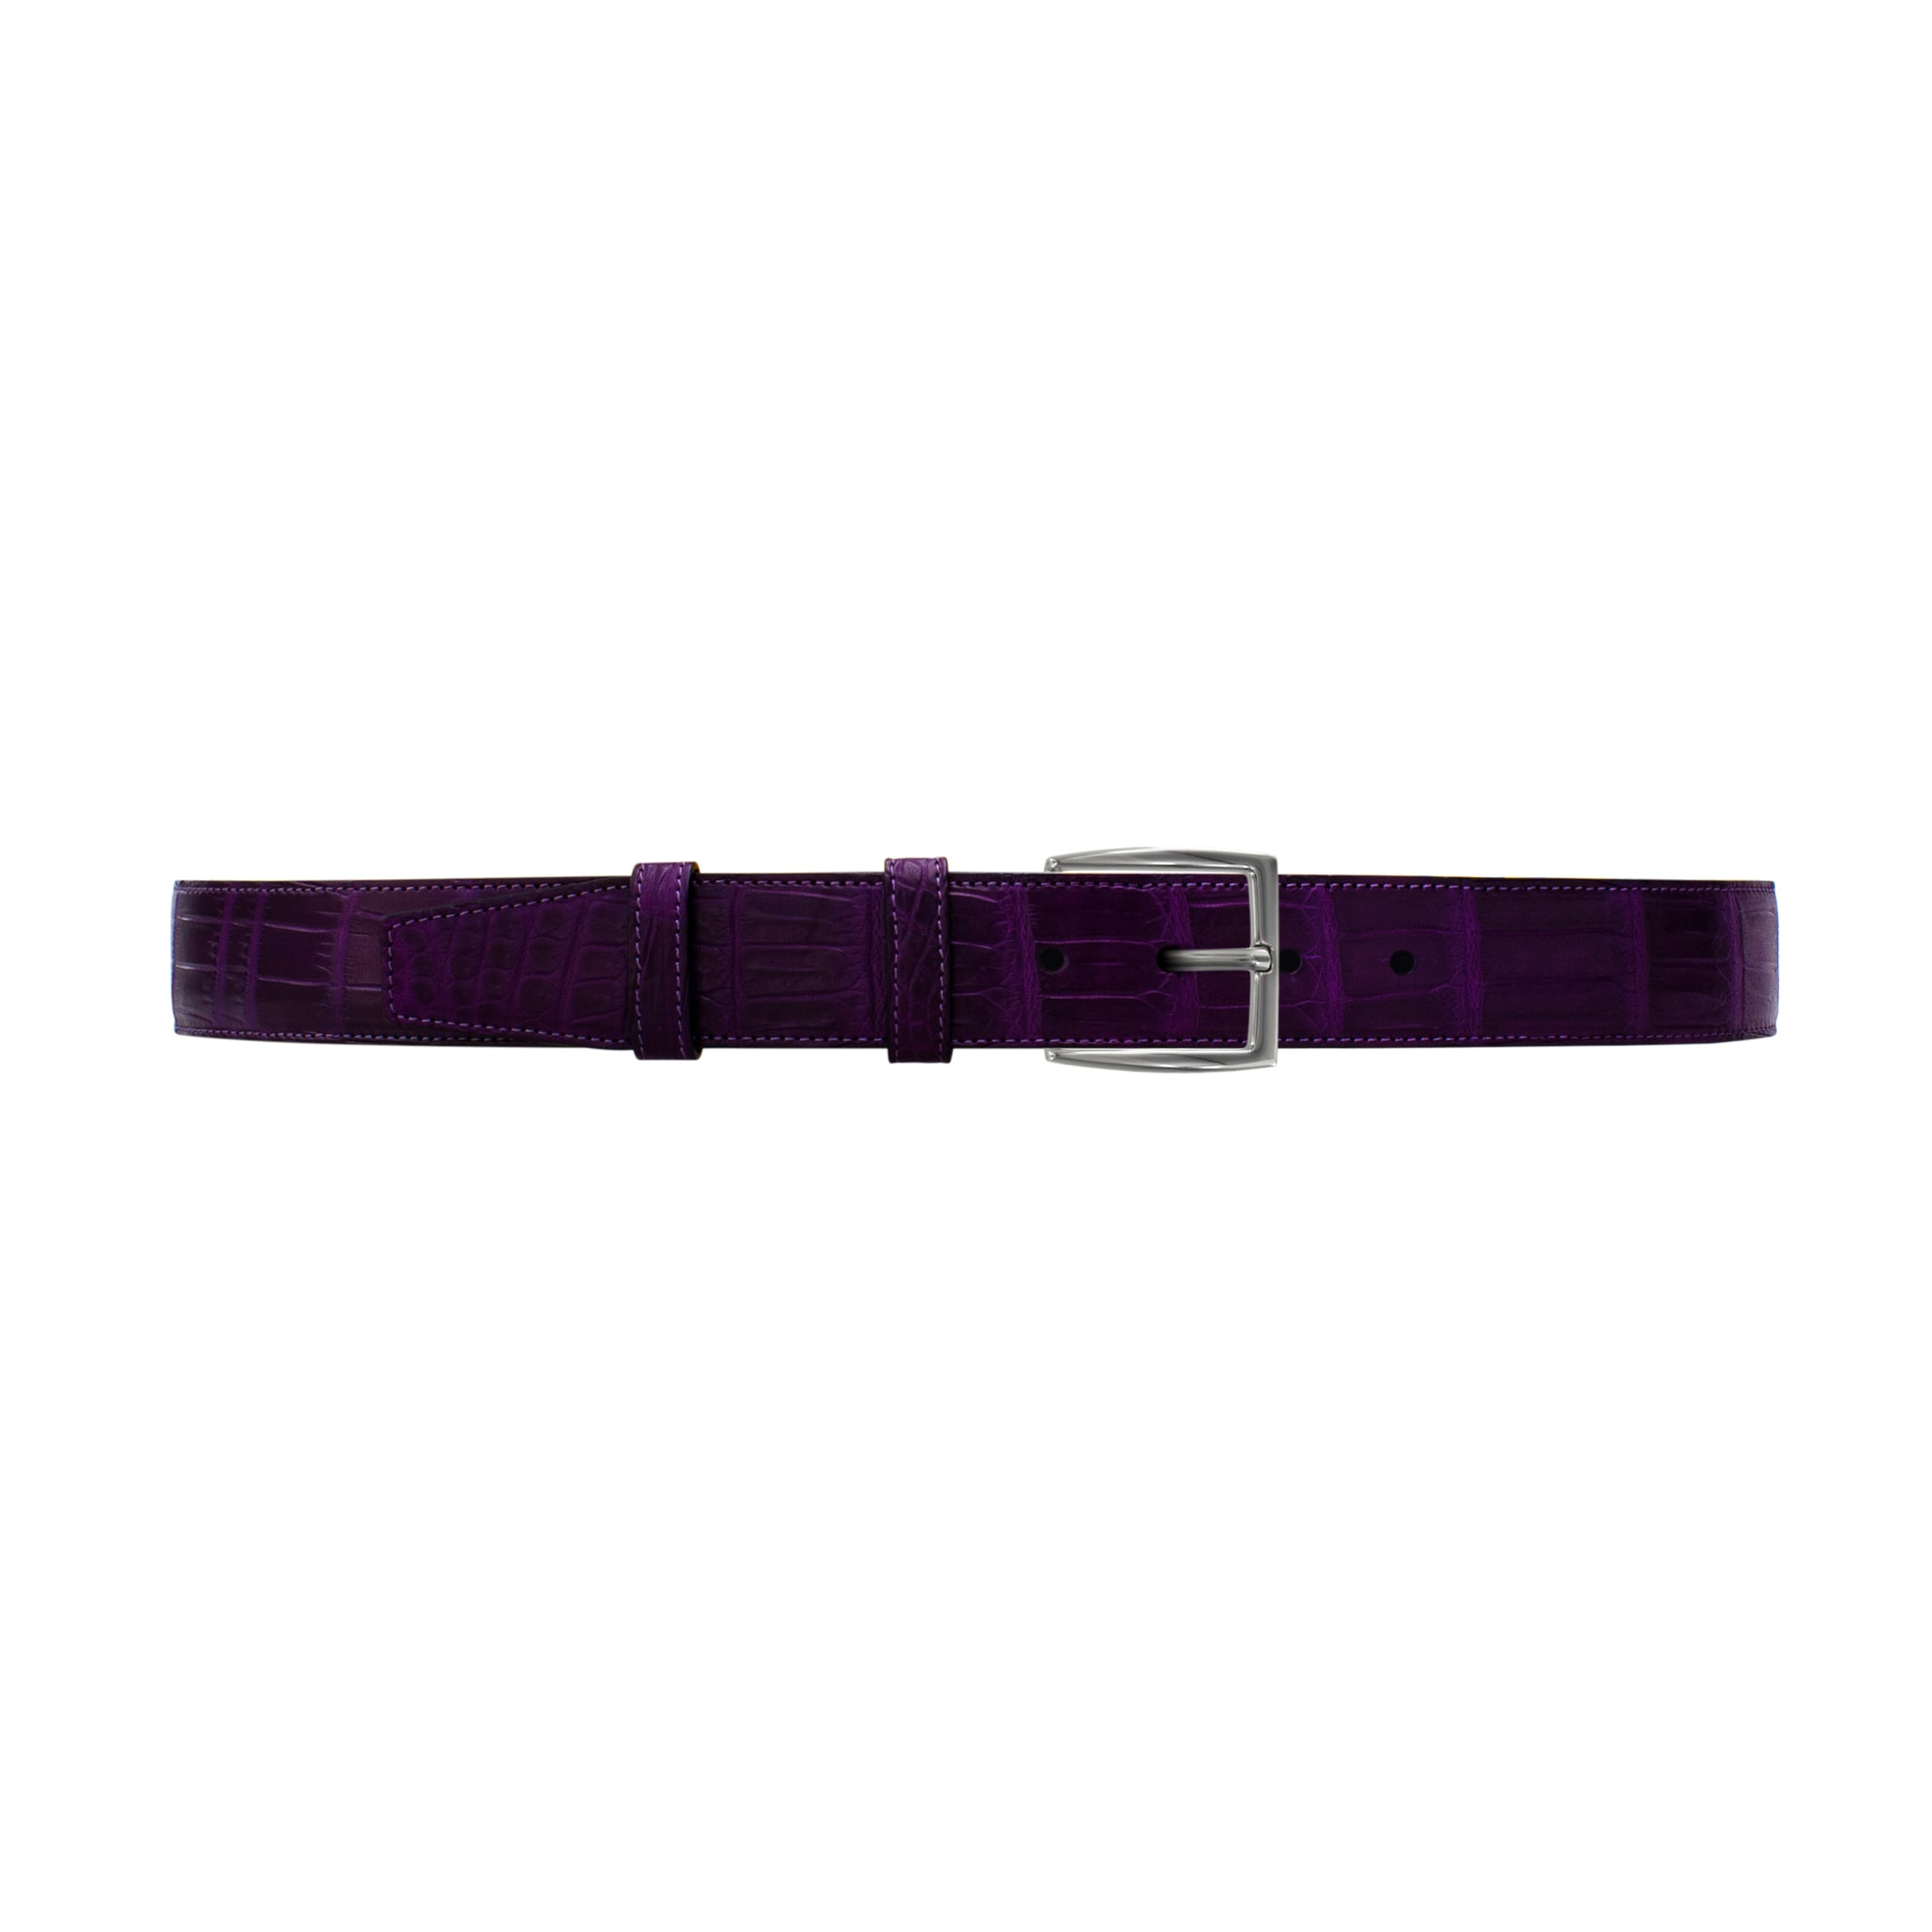 1 1/2" Violet Classic Belt with Winston Dress Buckle in Polished Nickel